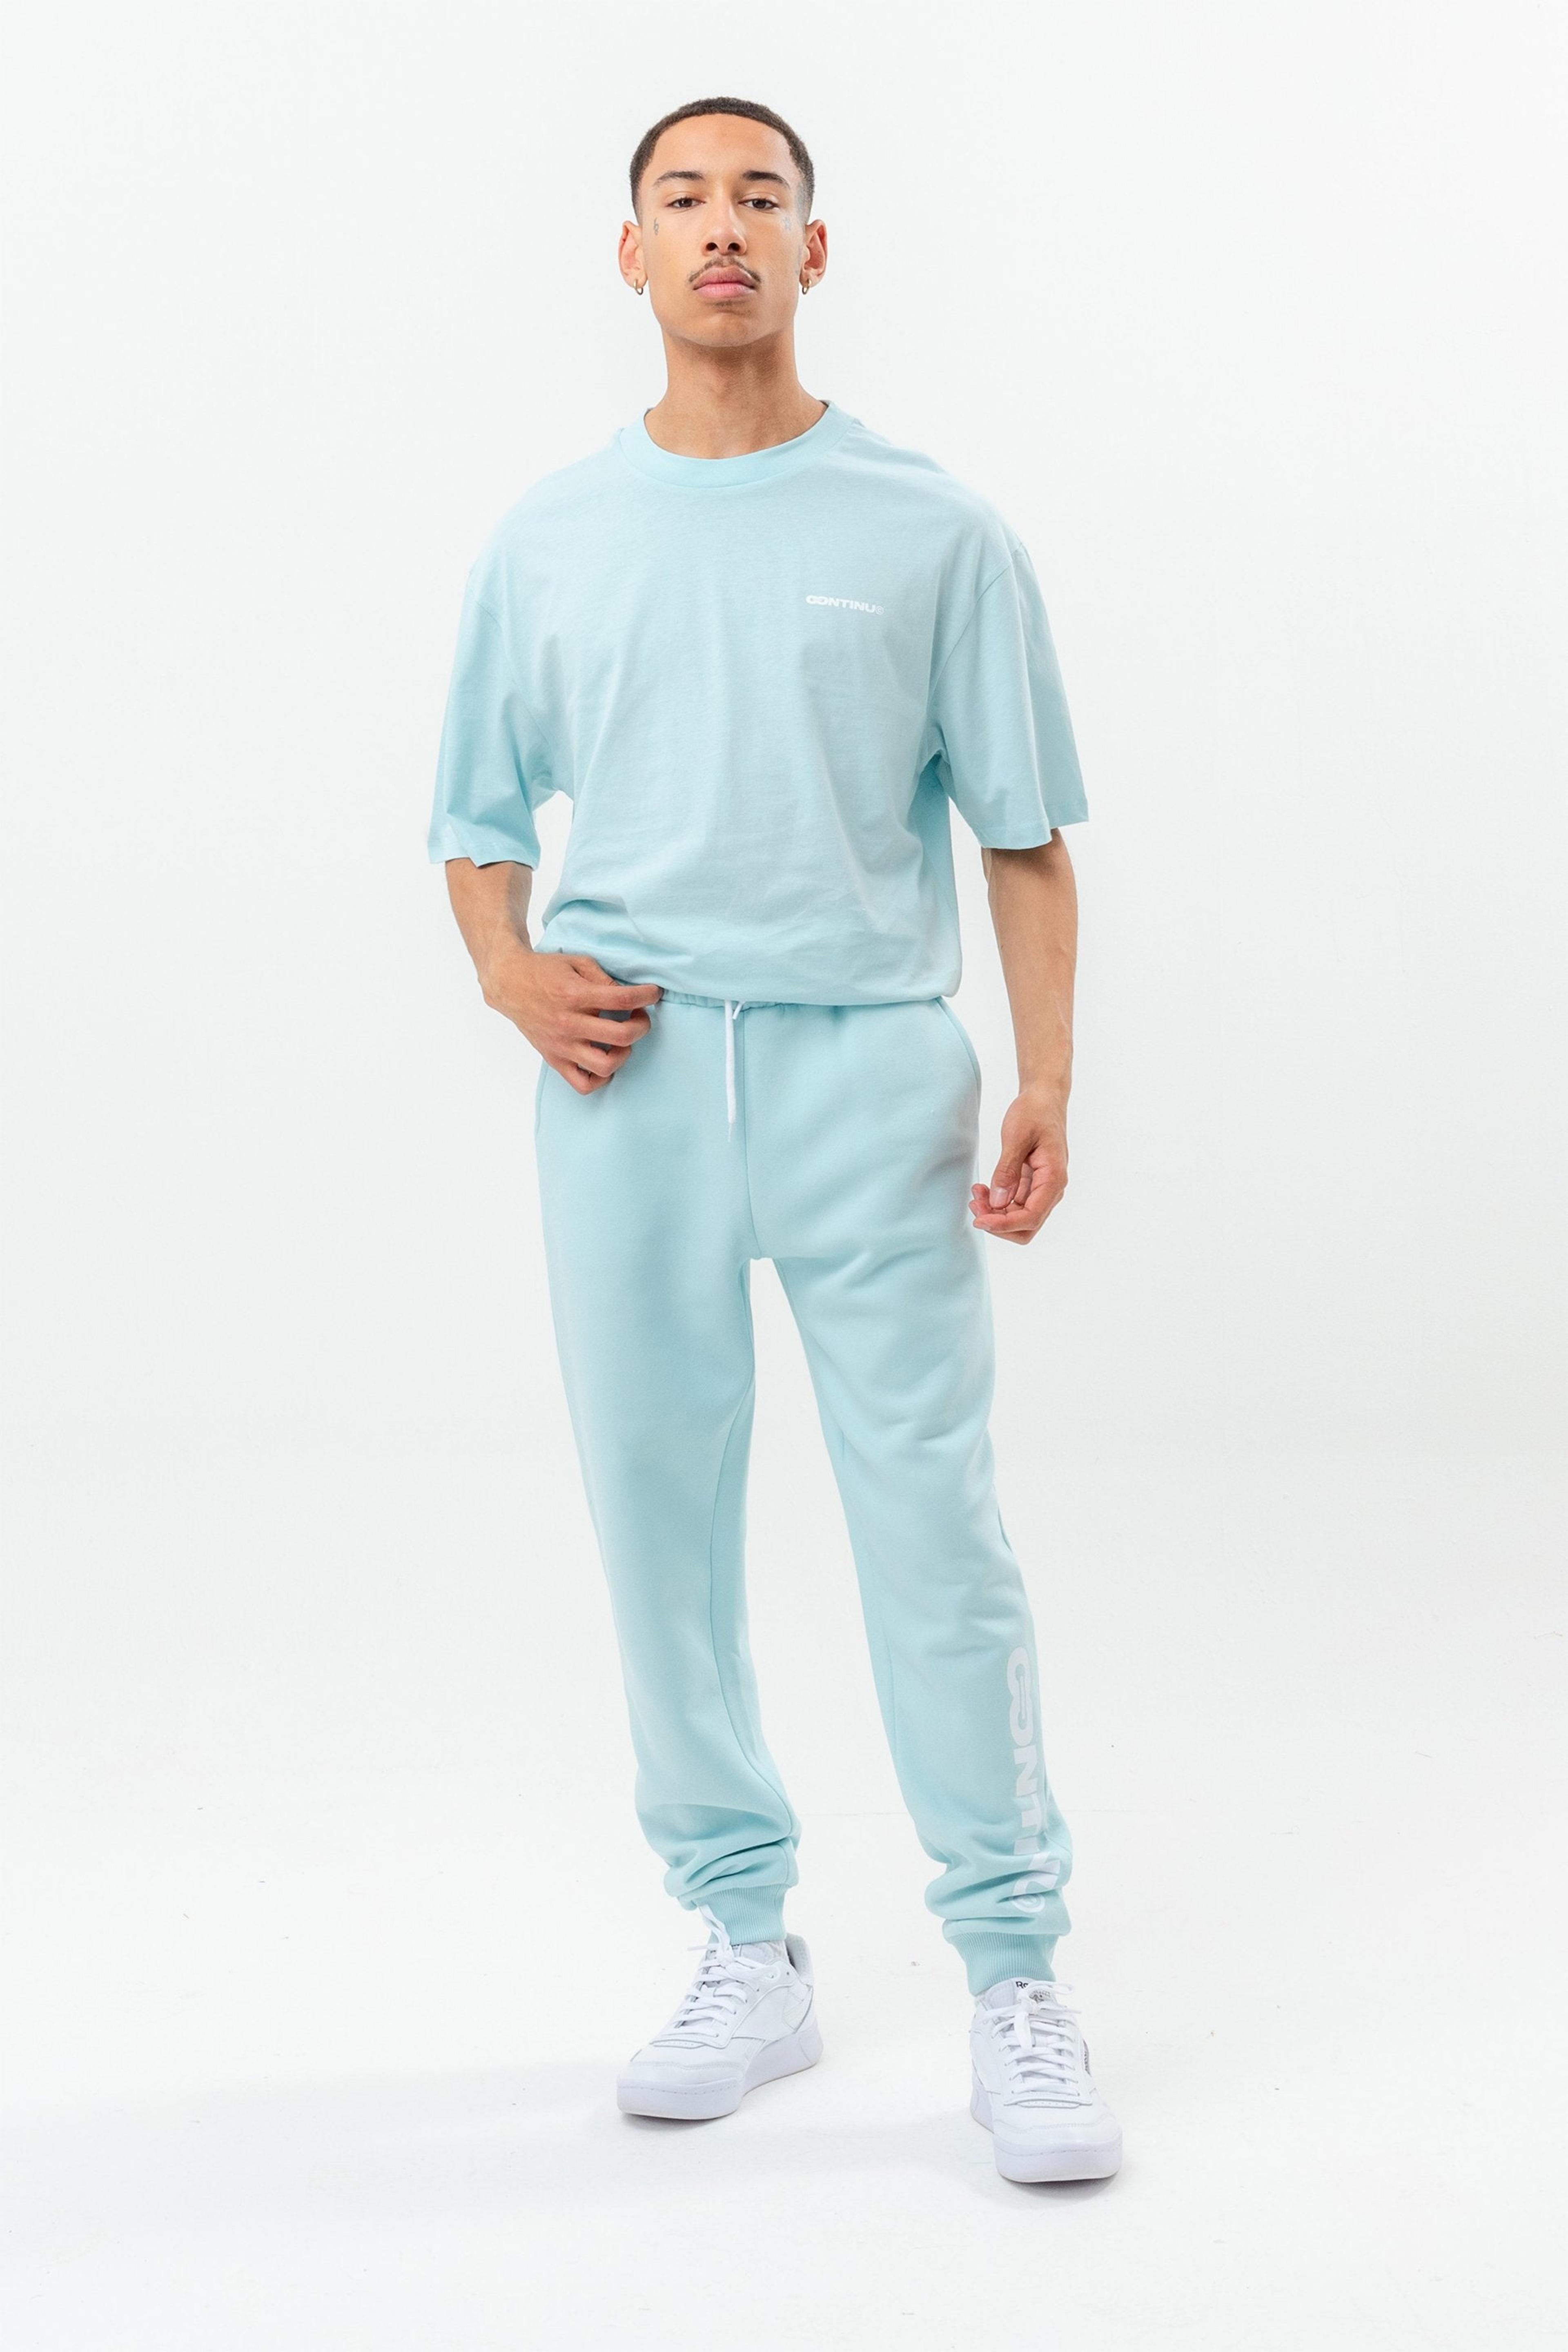 Alternate View 6 of CONTINU8 PALE BLUE OVERSIZED T-SHIRT